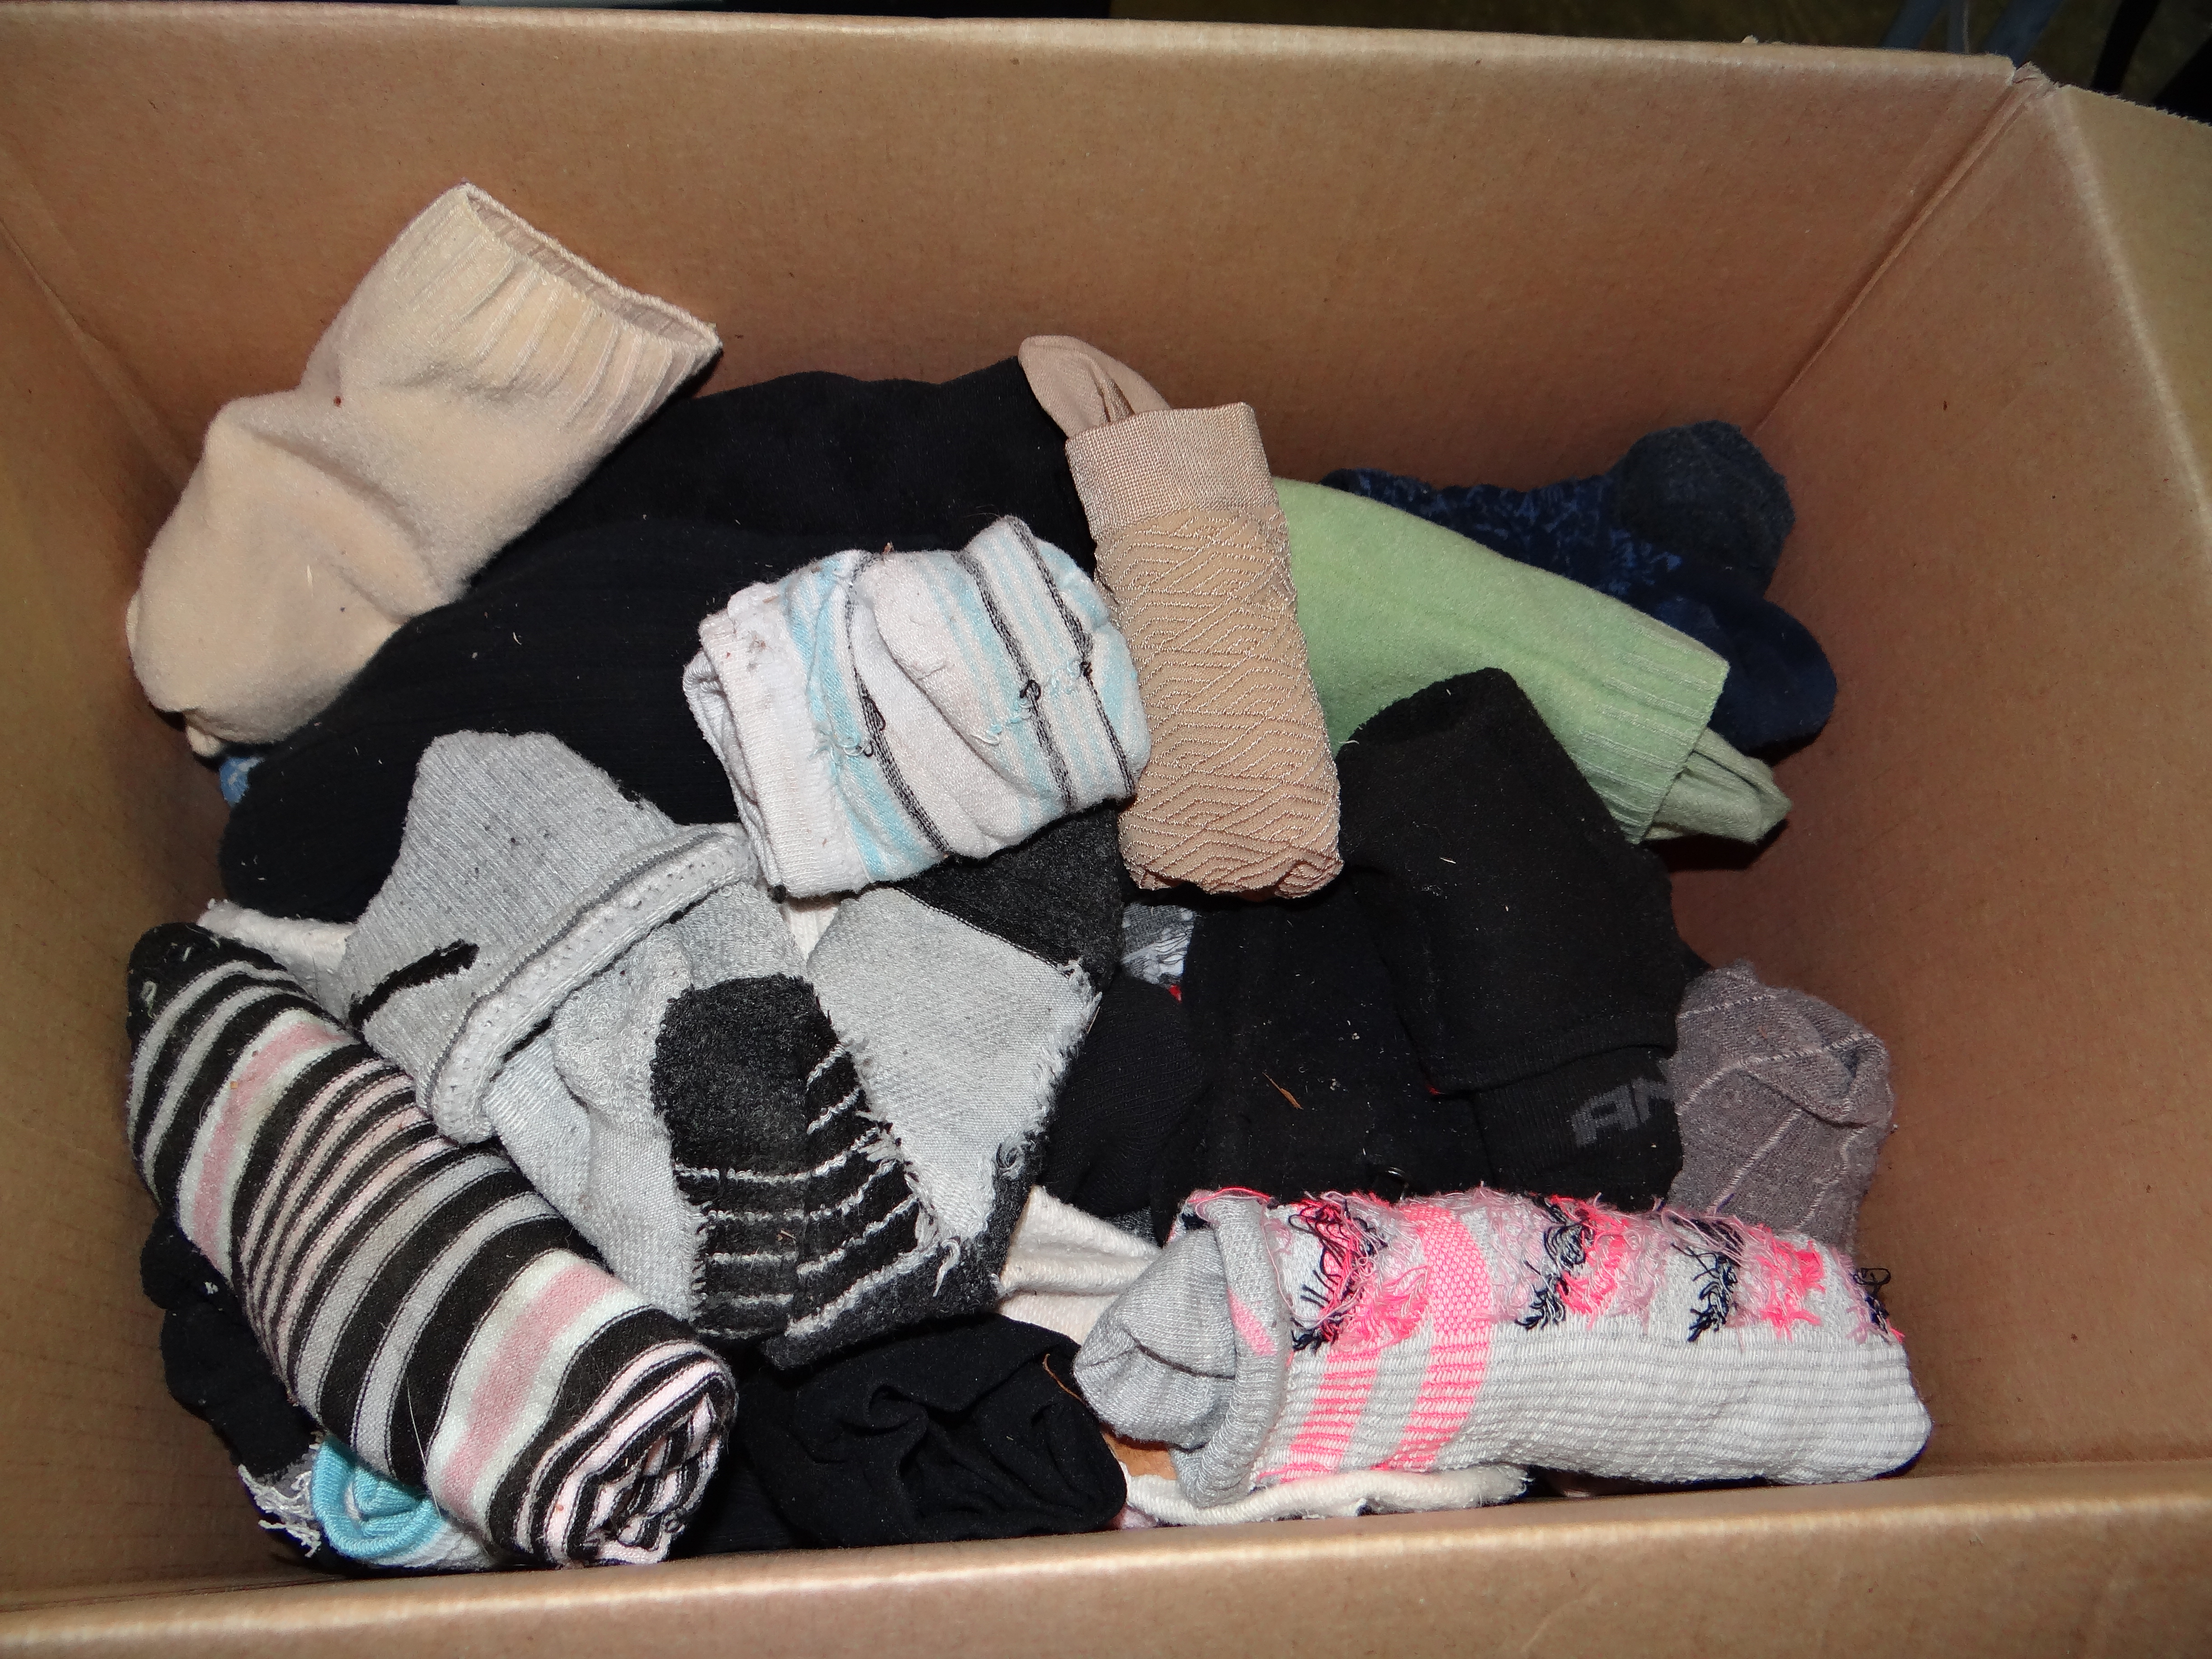 47-Large Box of Socks, Look To Be Mostly Women's